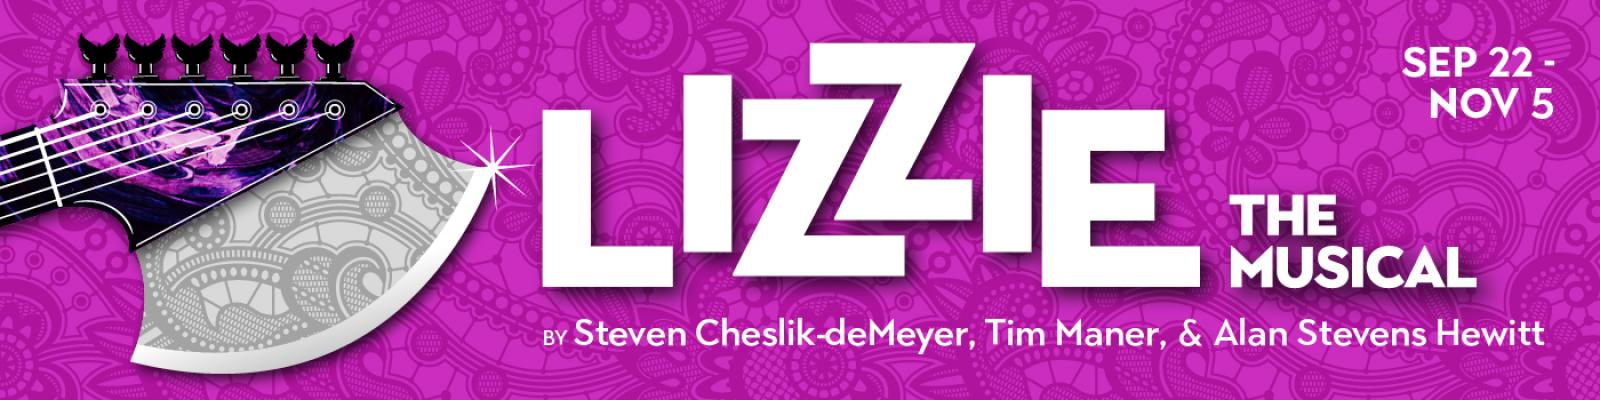 Decorative header for Lizzie the Musical